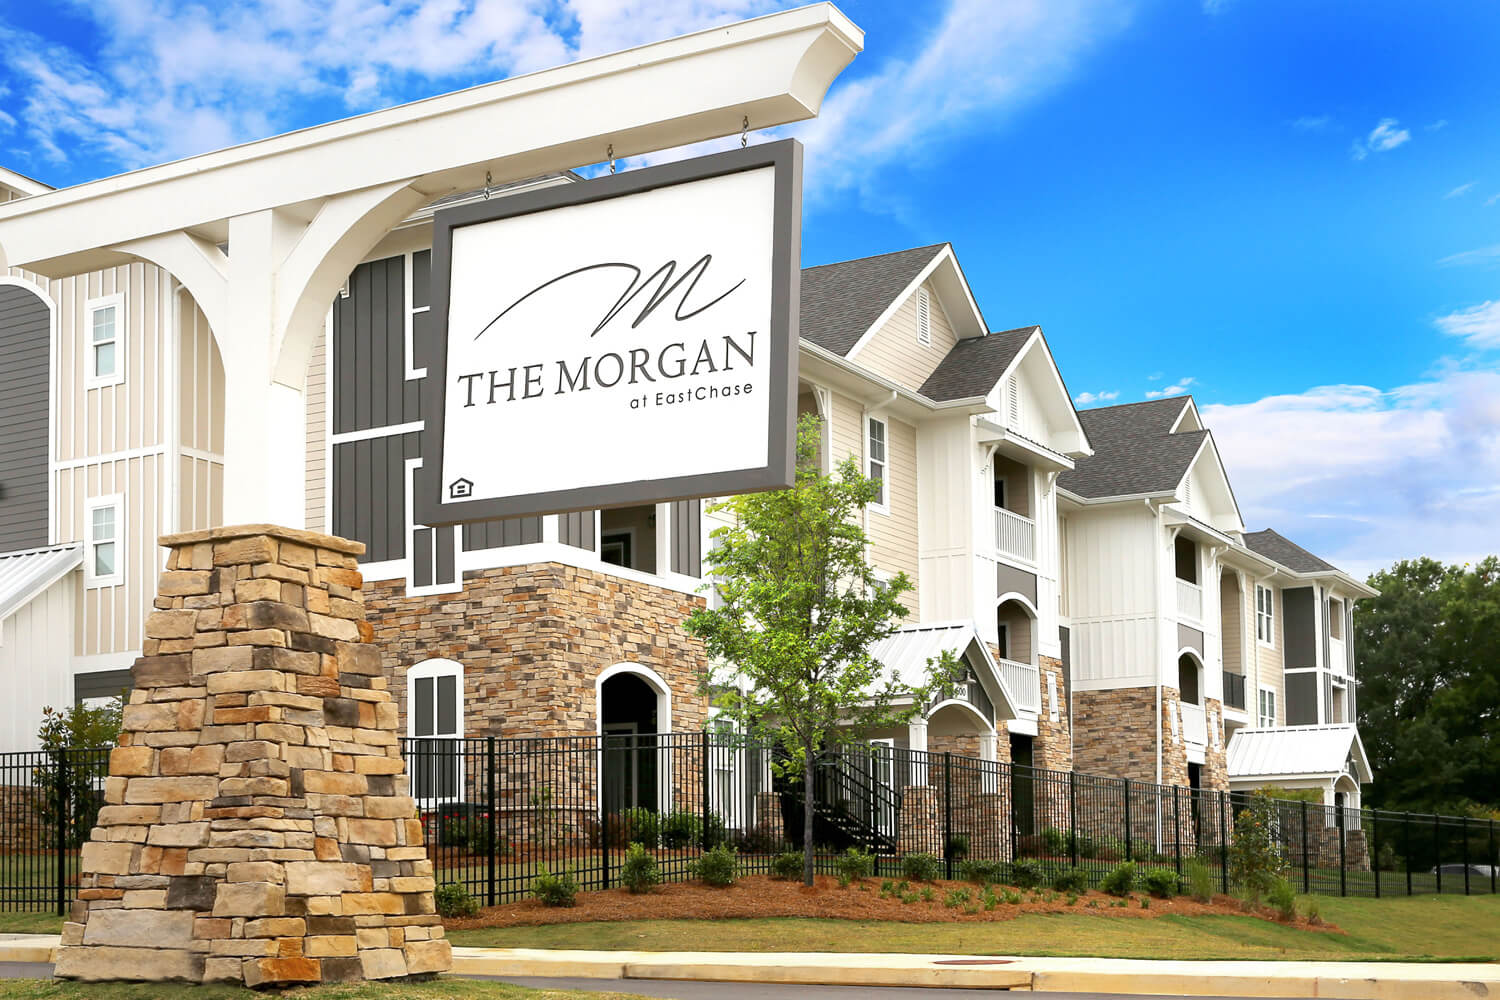 The Morgan Apartments Designed by Foshee Architecture - Entry Sign